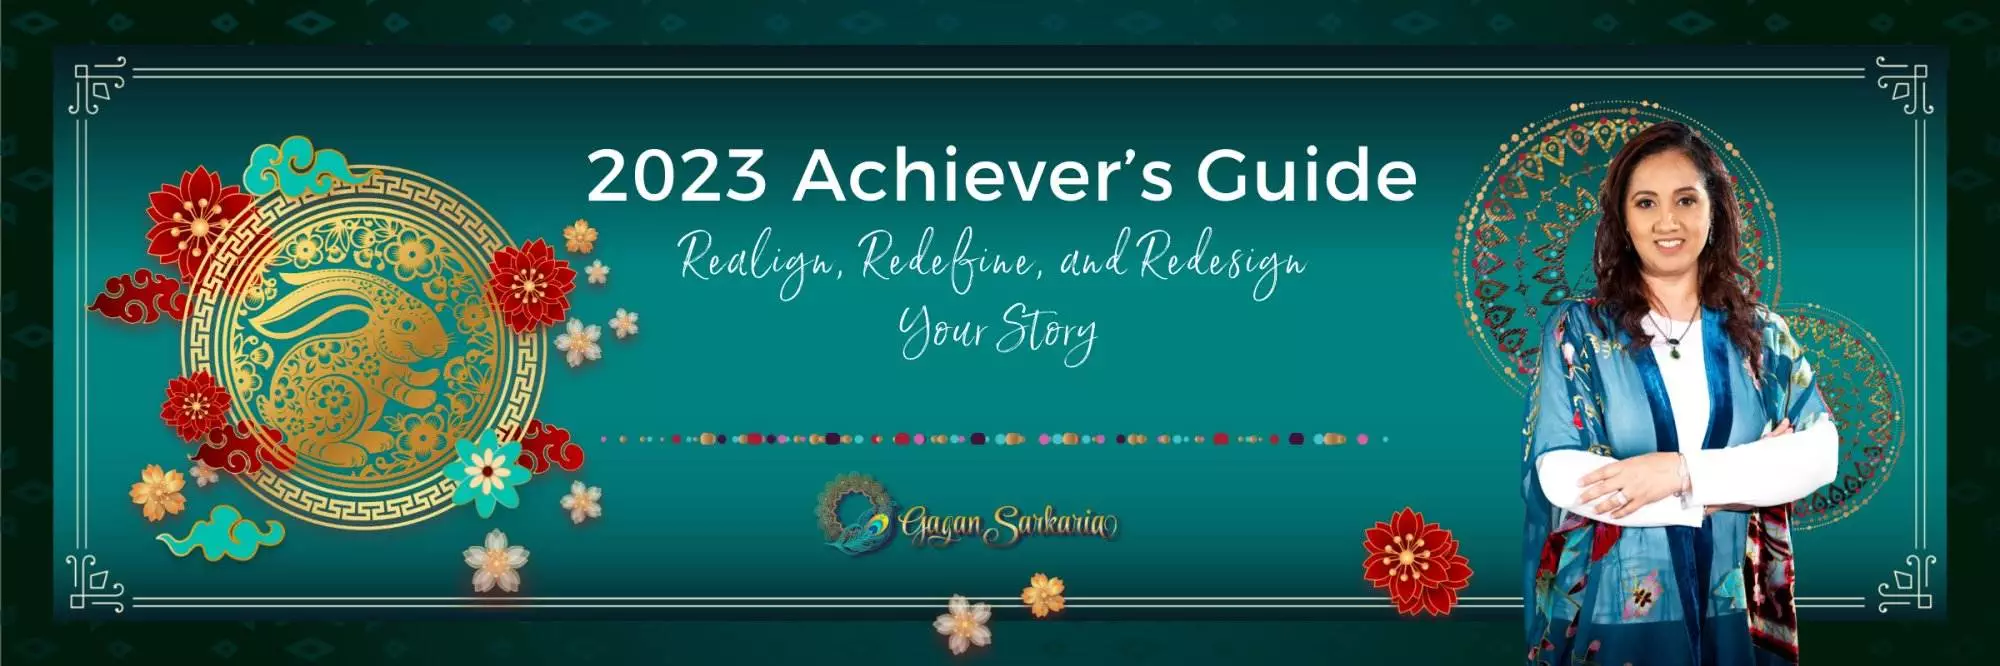 2023-Achievers-Guide-Opt-in-banner